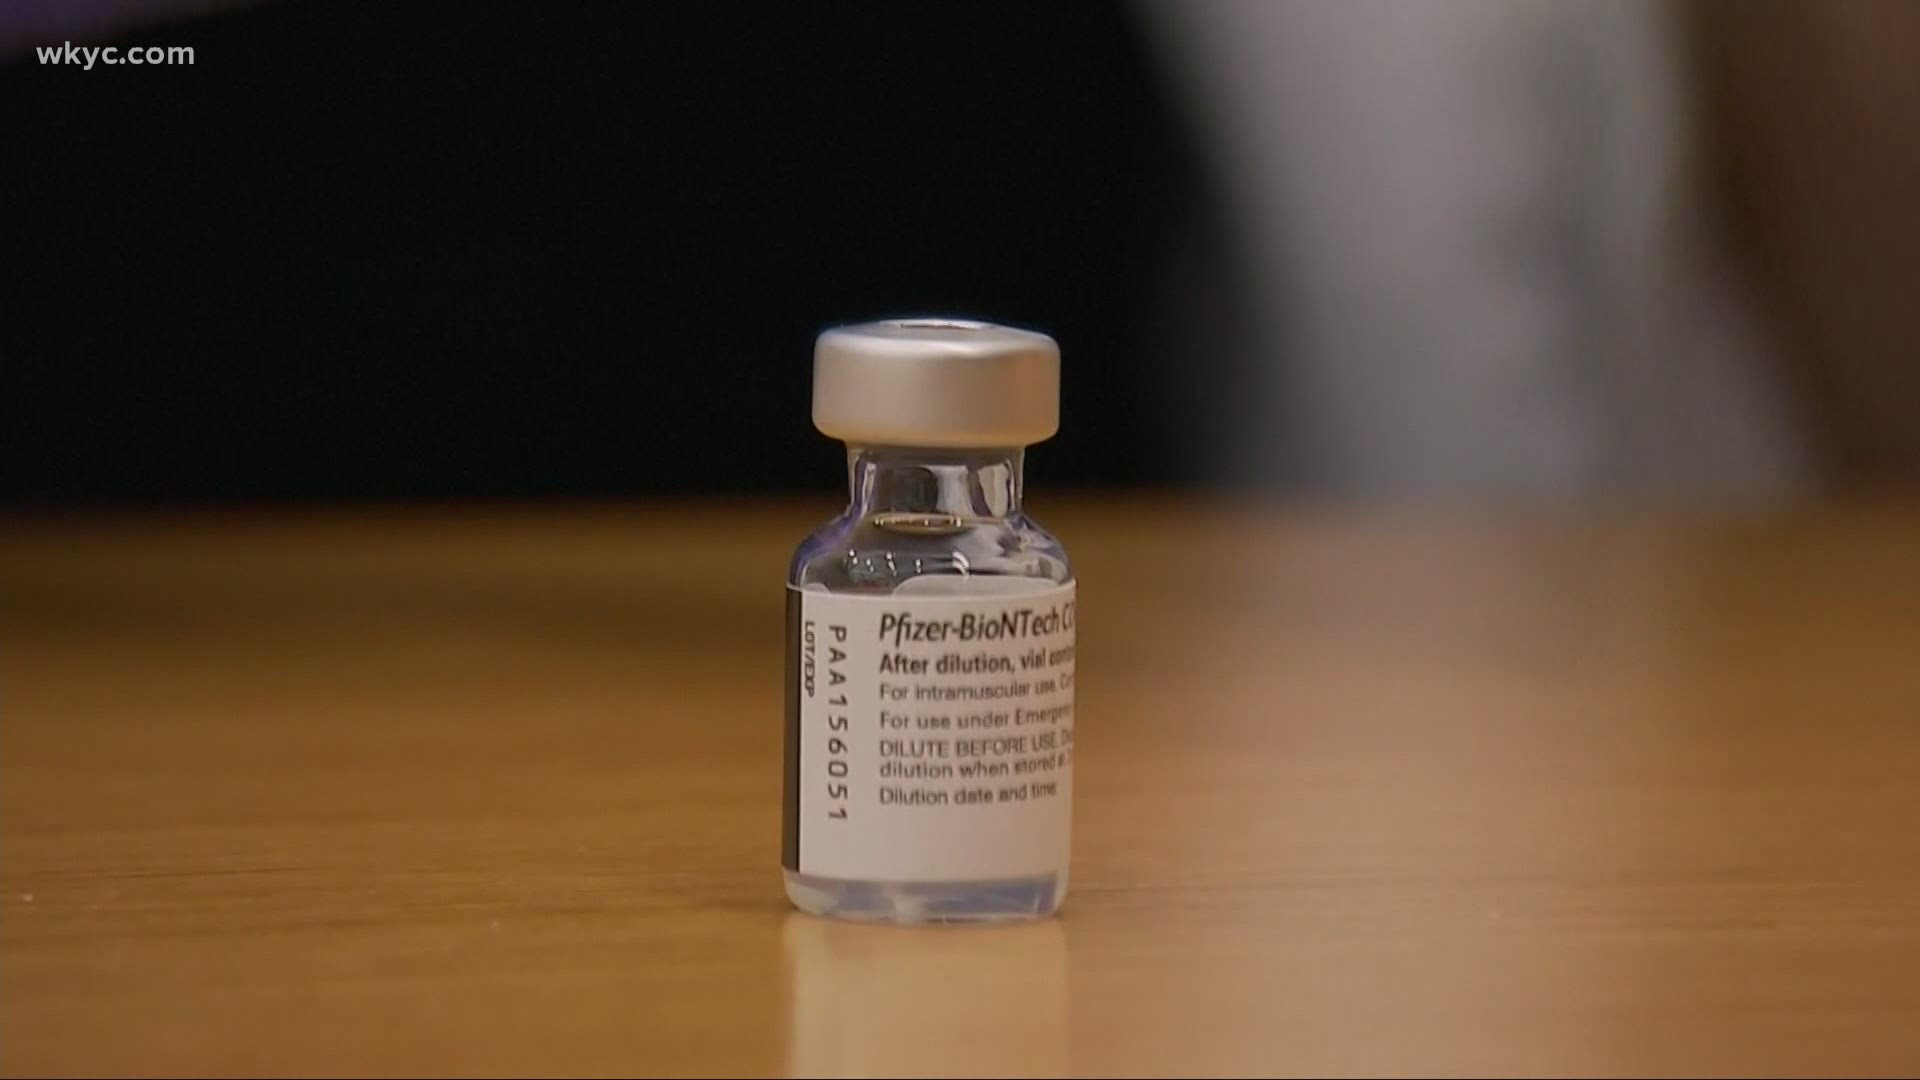 Many are hoping to get the vaccine as soon as possible, but there are things you need to know. Monica Robins has a few answers to your questions.